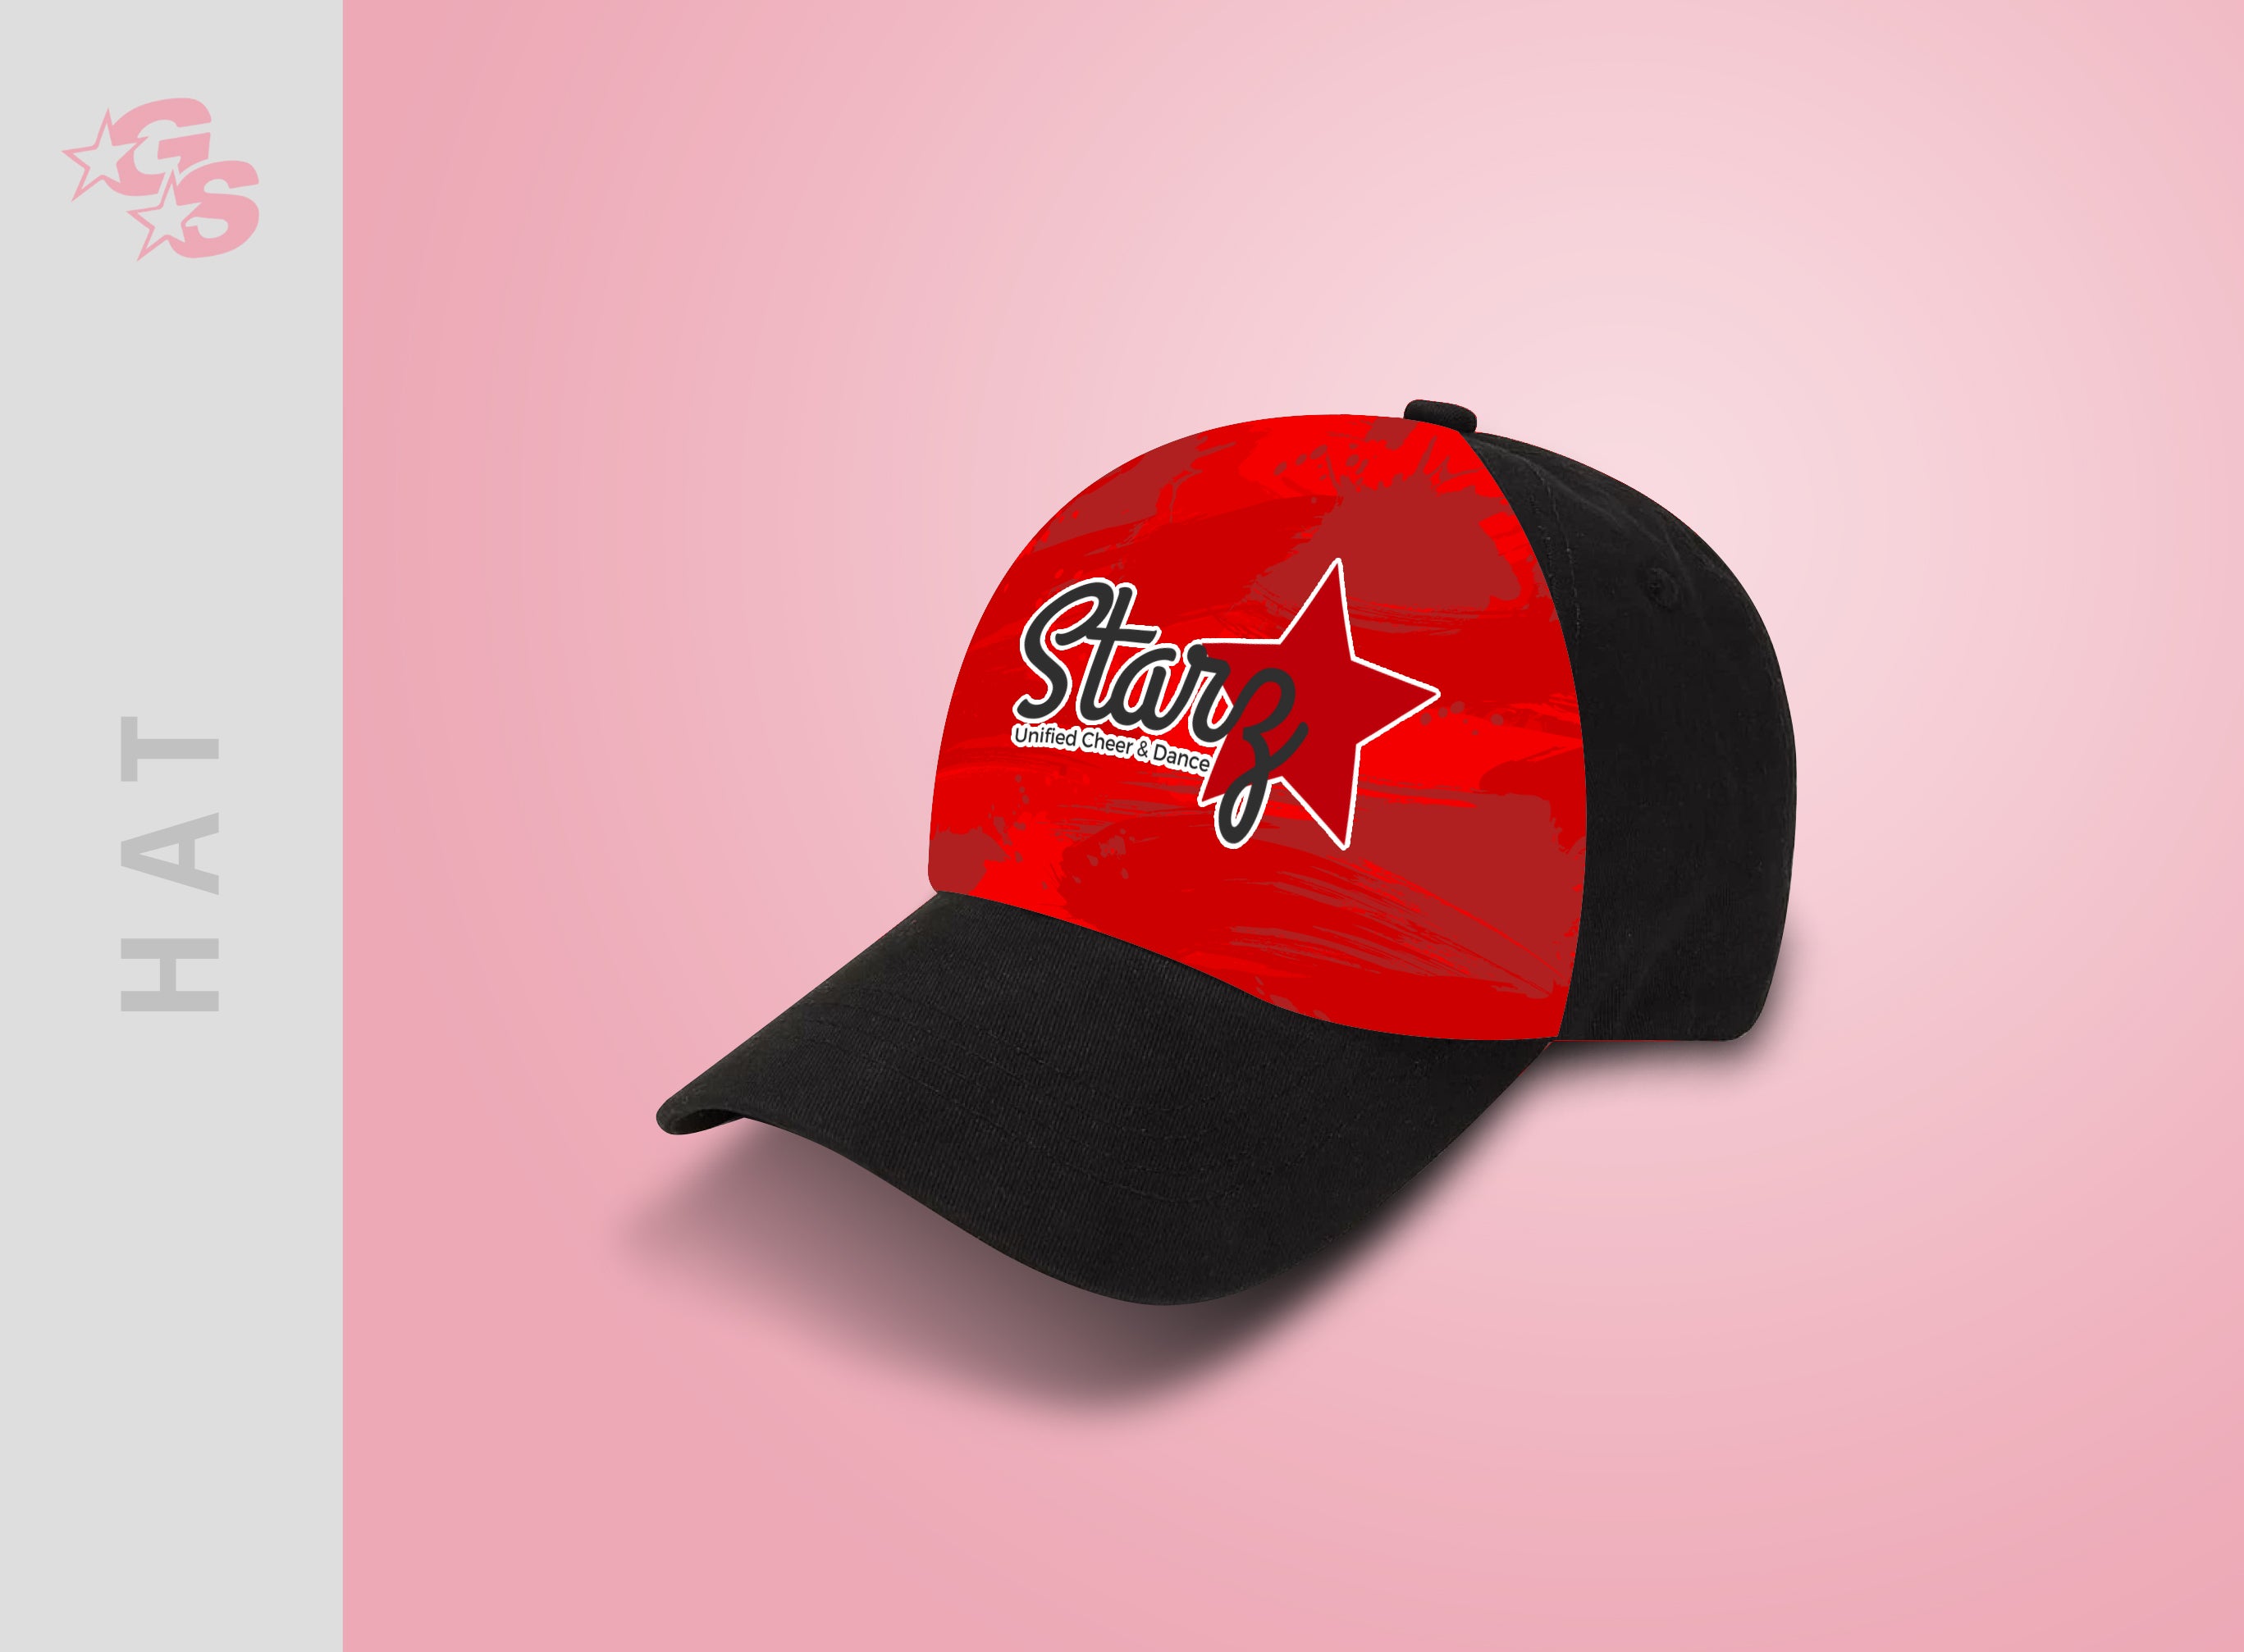 Special Olympic Starz Unified Cheer and Dance Hat